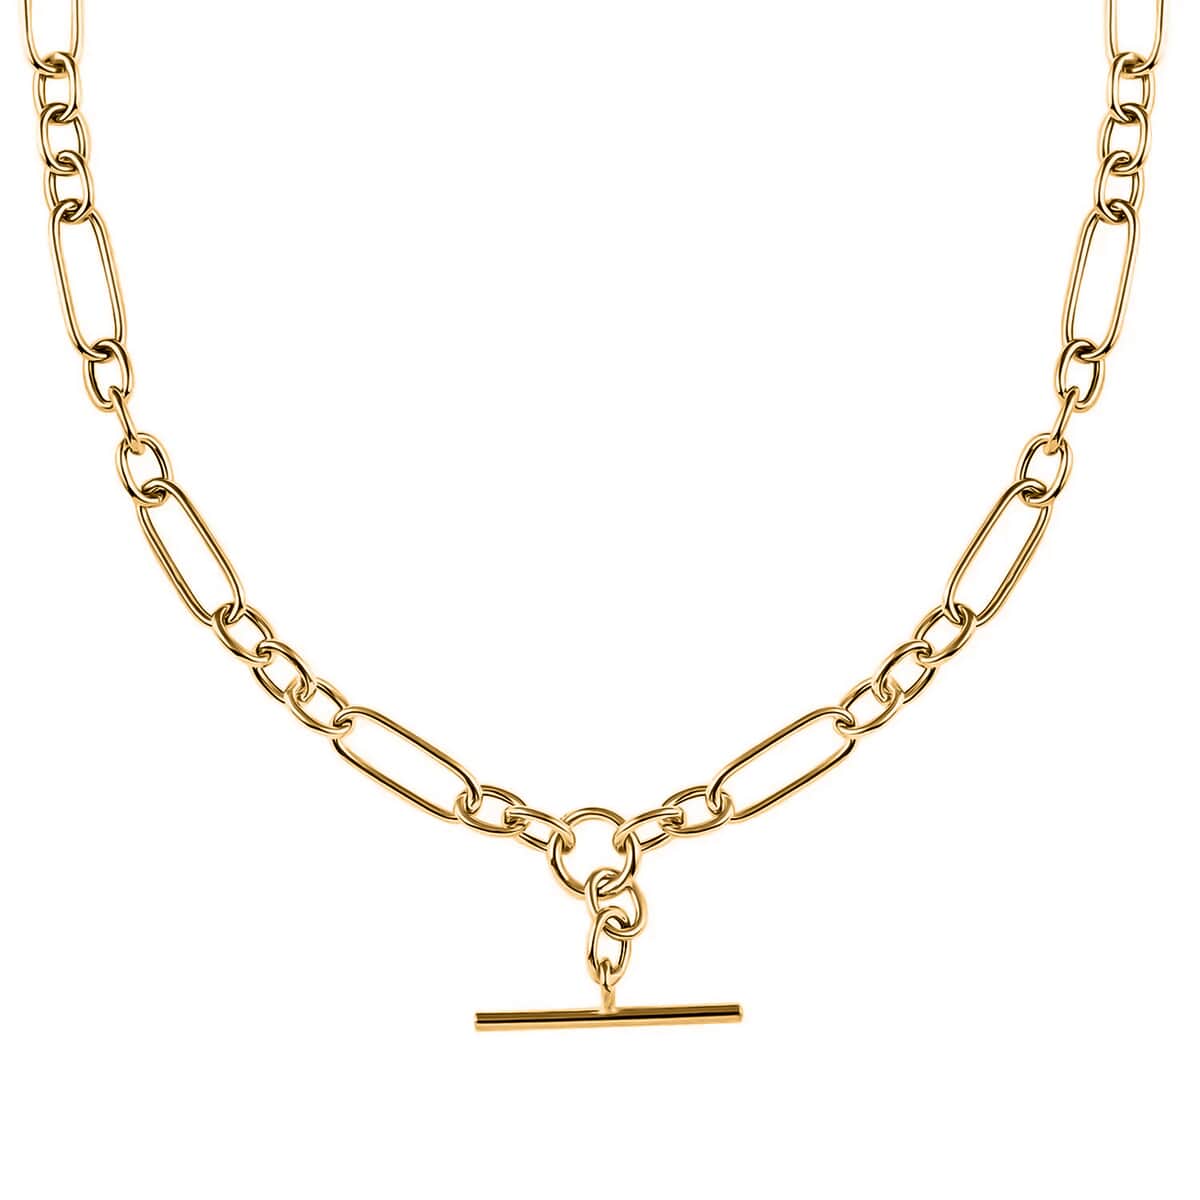 Buy Gold Gioia Italian 10K Yellow Gold Link Chain Necklace, Gold Link ...